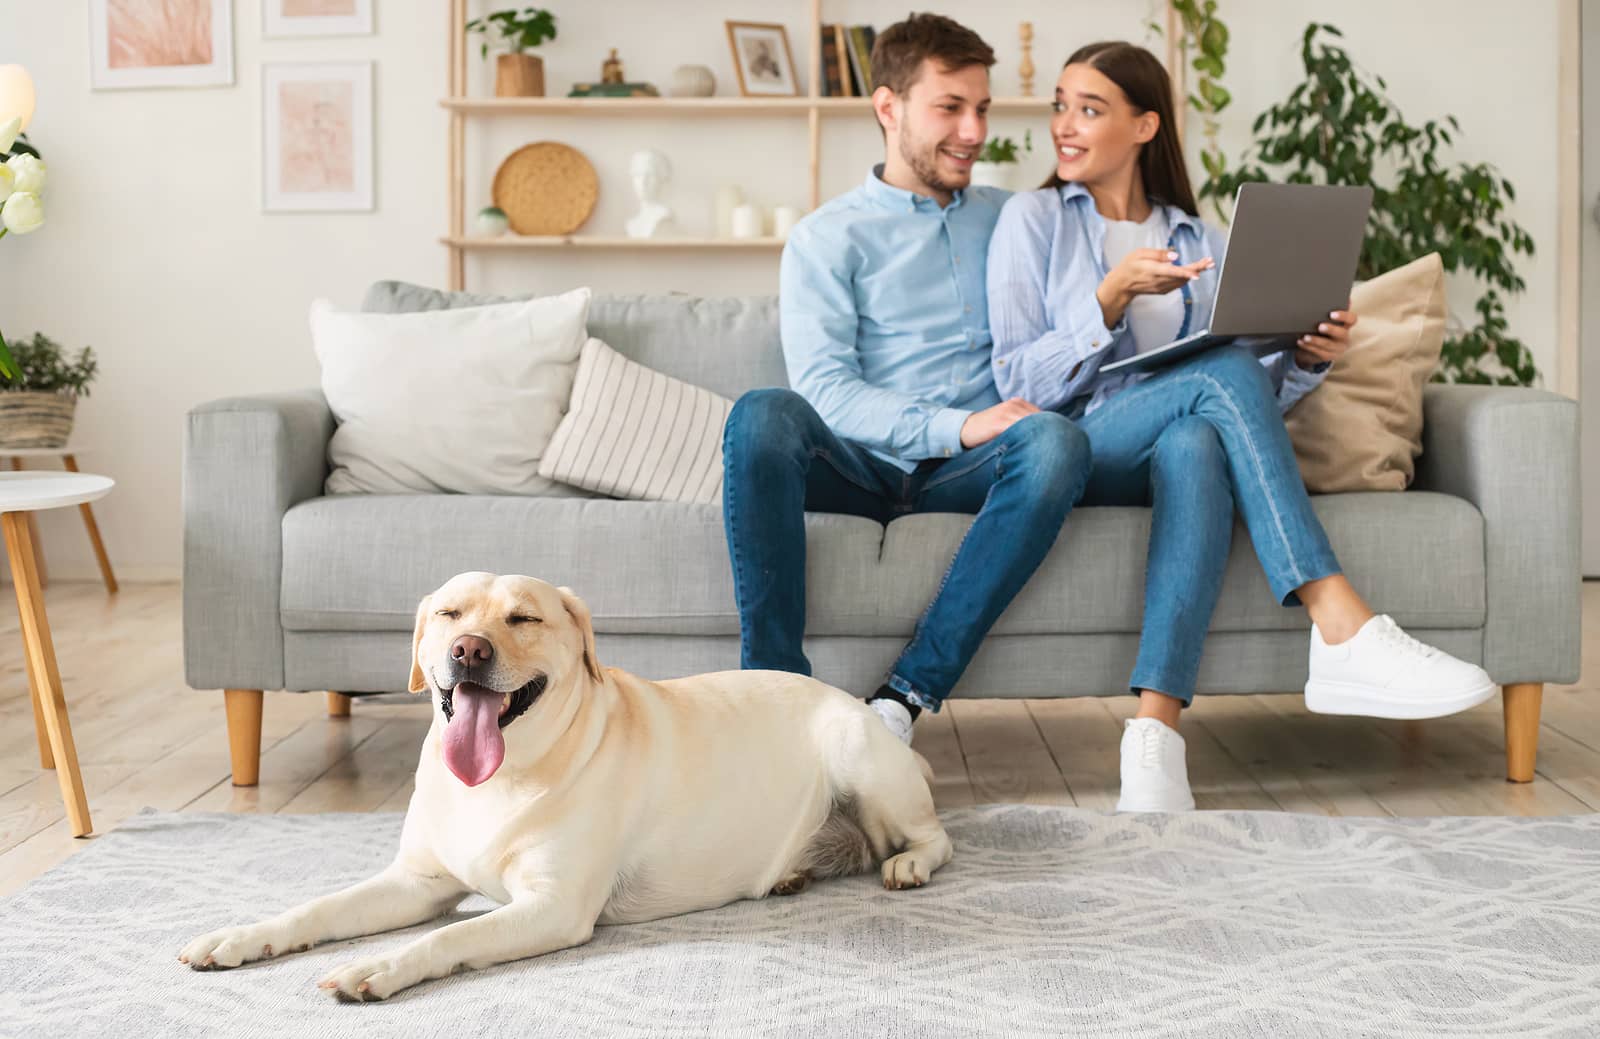 Do Home Insurance Policies Cover Pet Damage?